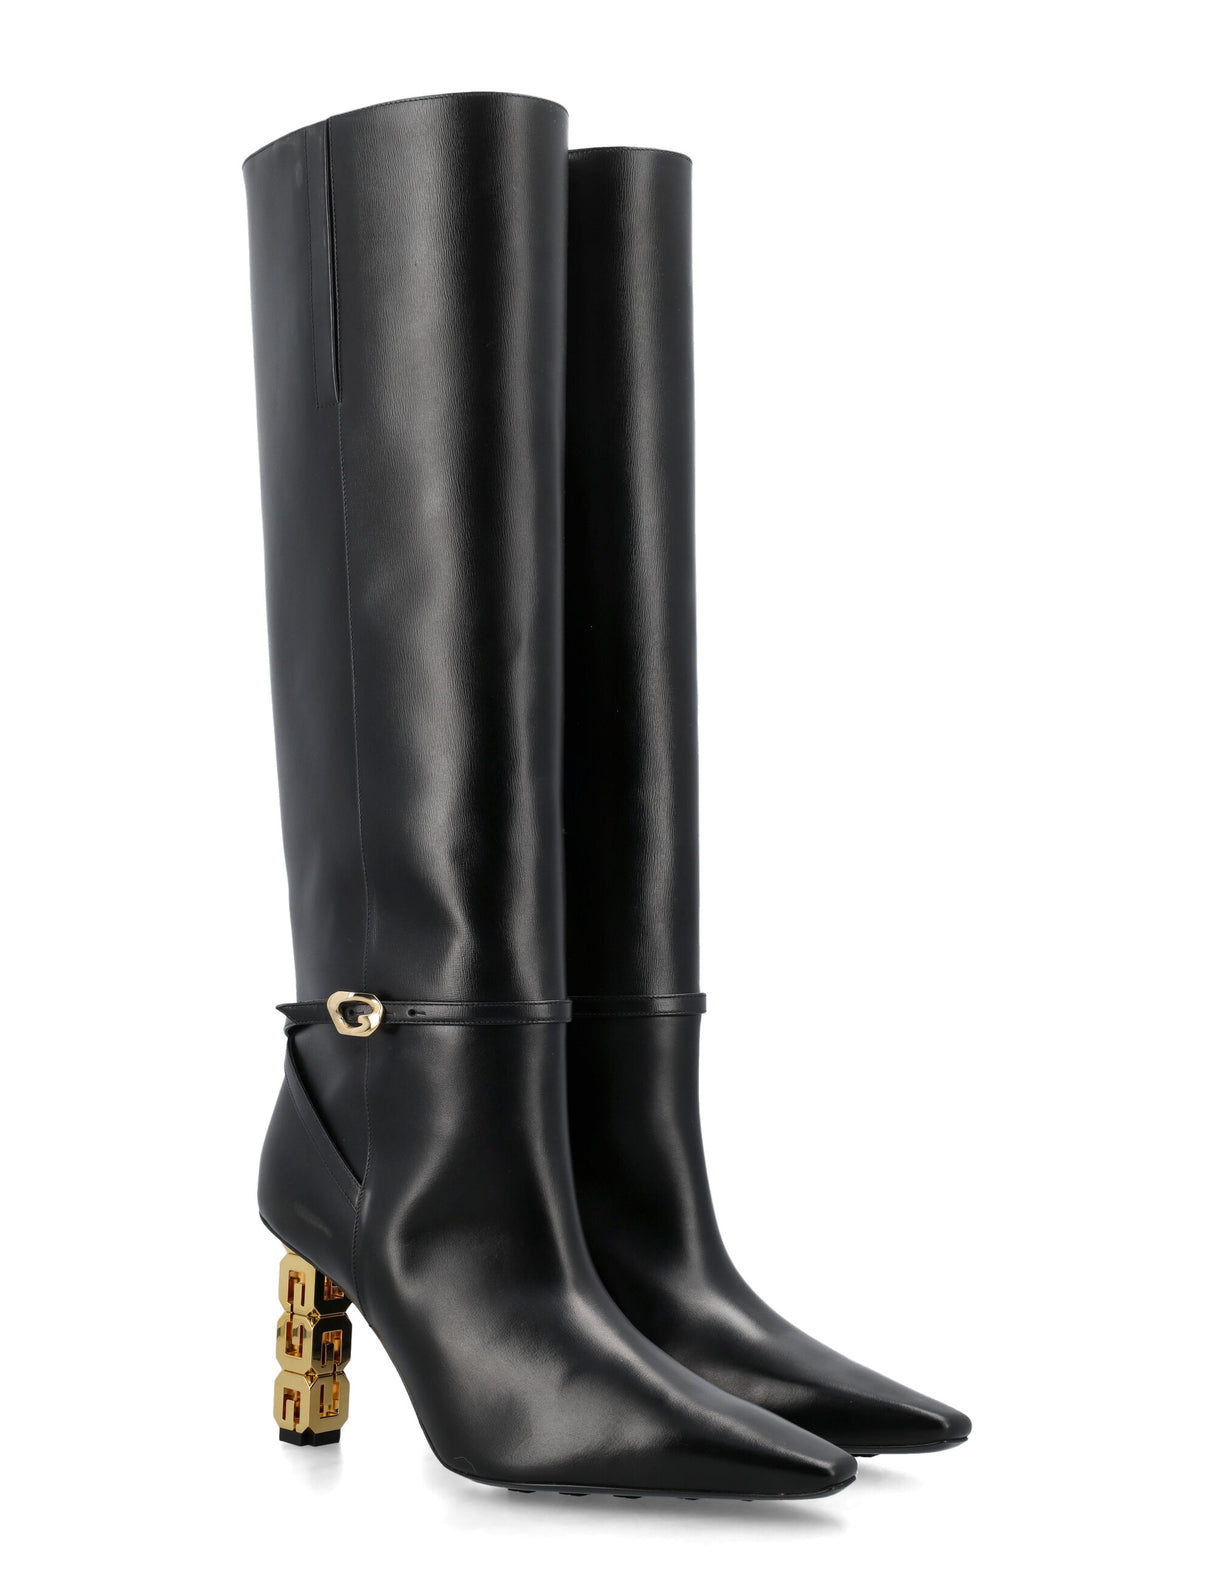 Sculpted Heel Leather High Boots for Women by Givenchy